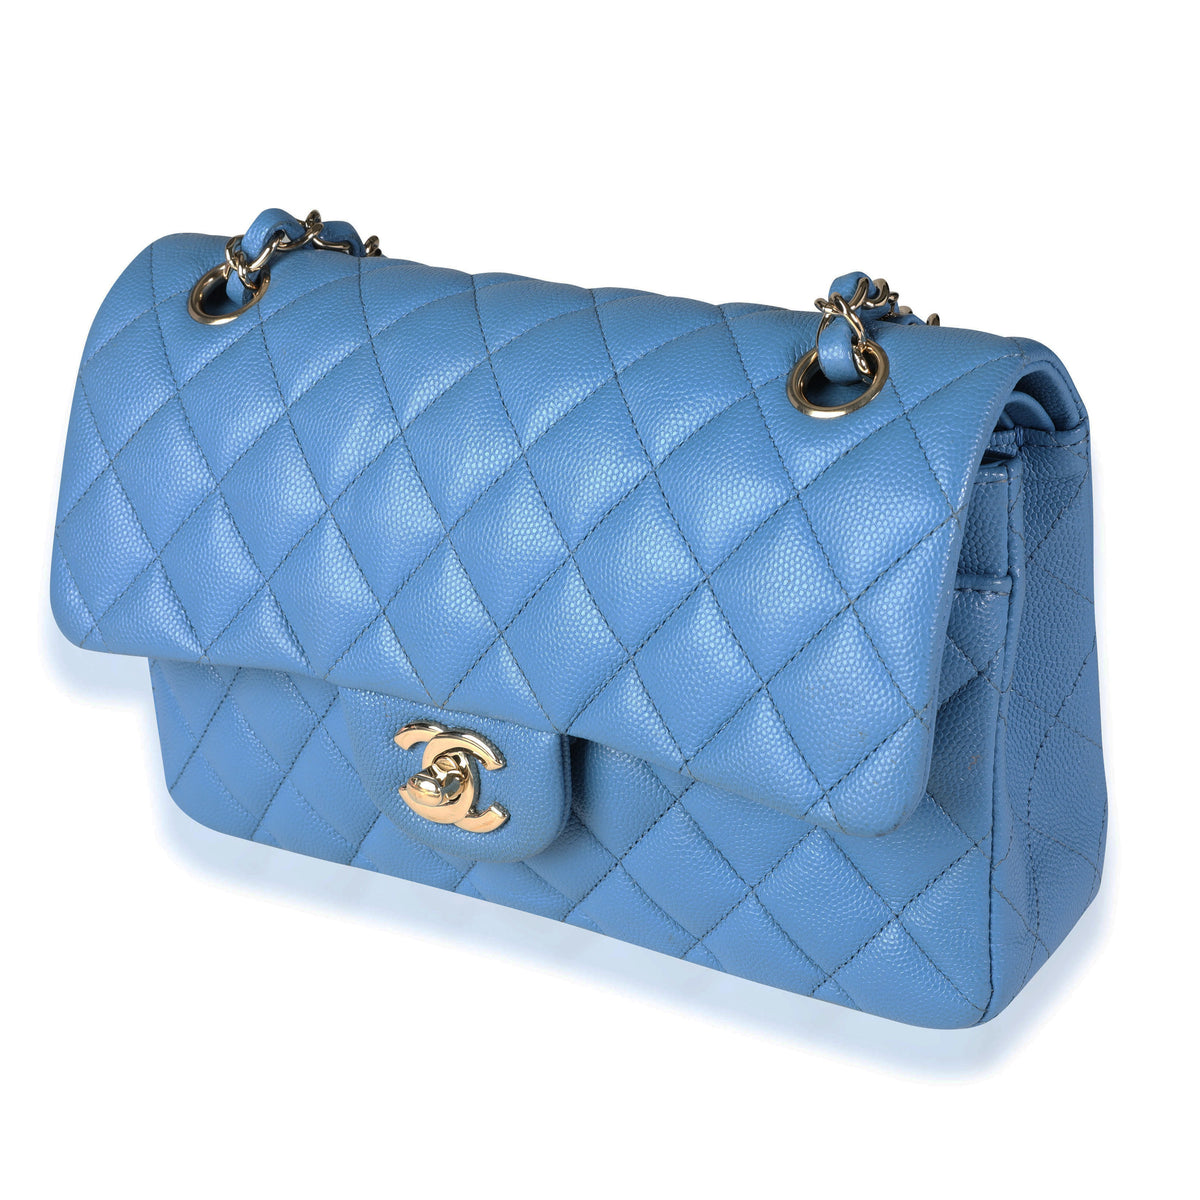 Blue Chanel Bags  384 For Sale on 1stDibs  chanel blue bag chanel bag  blue royal blue chanel bag